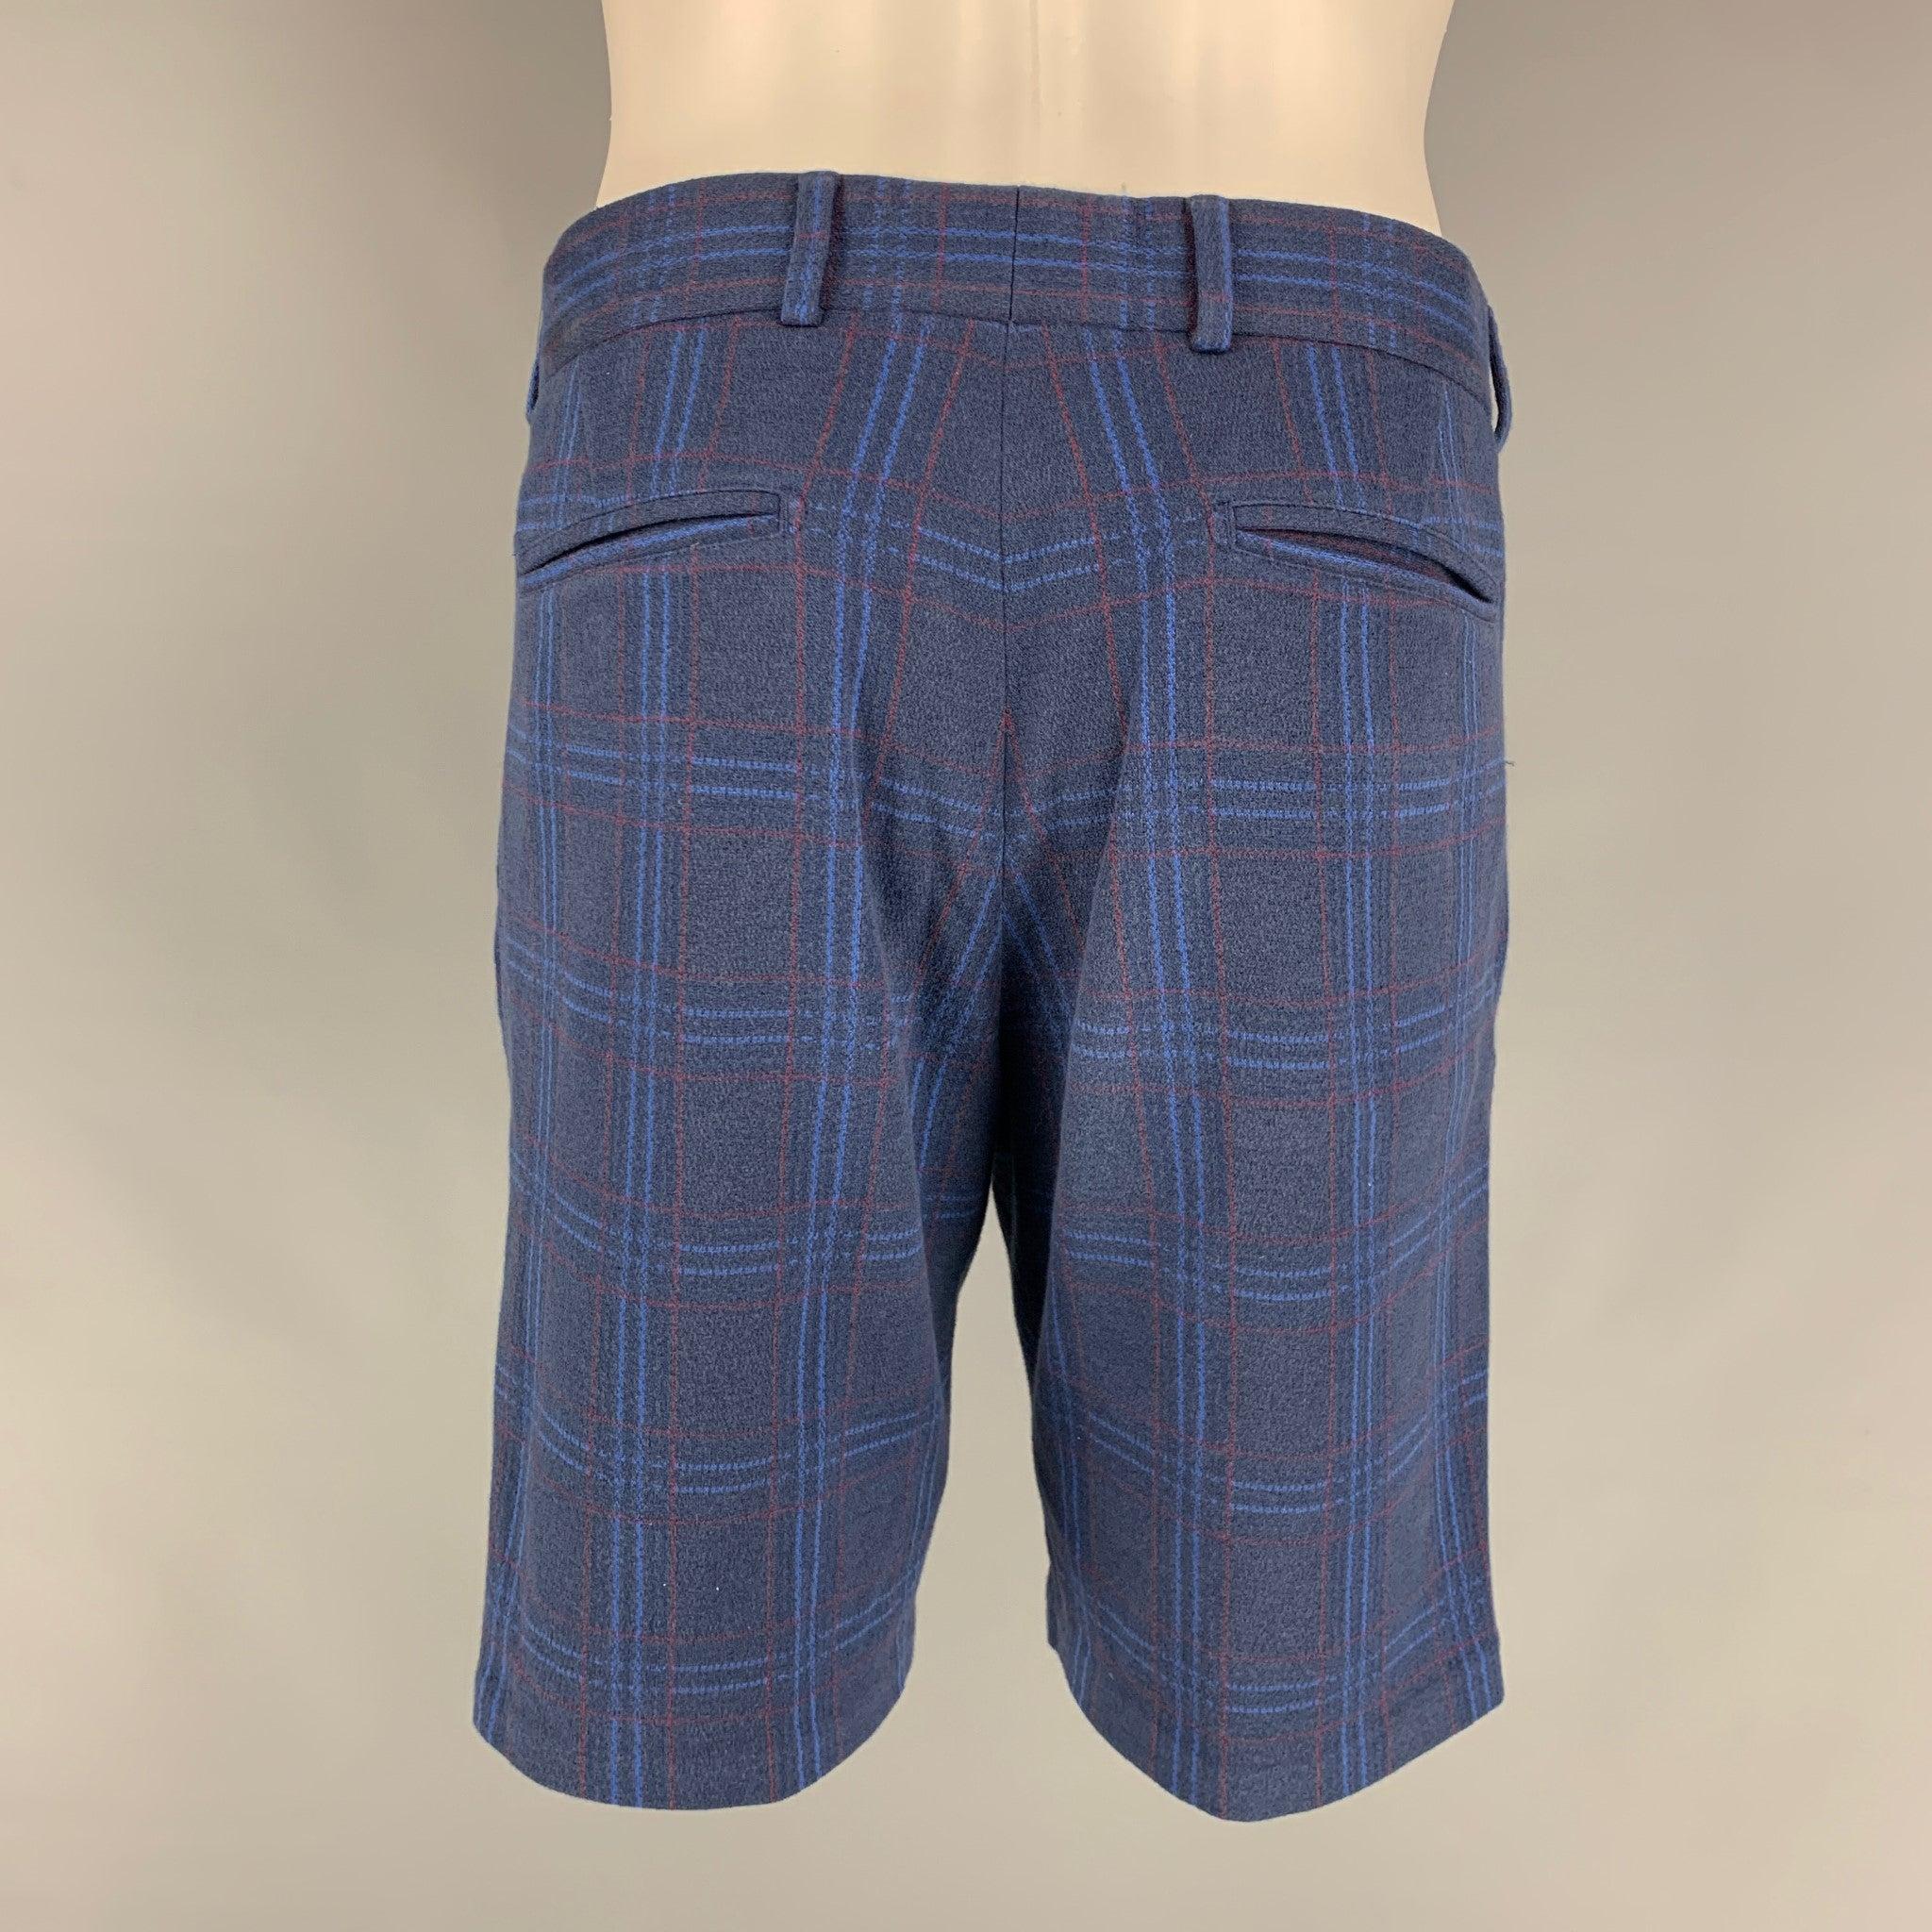 LOUIS VUITTON casual shorts come in navy blue cotton featuring a plaid print, zip up closure and a straight fit. Made in Italy.Very Good Pre-Owned Condition 

Marked:   40 

Measurements: 
  Waist: 32 inches Rise: 10 inches Inseam: 9 inches  
 
 


